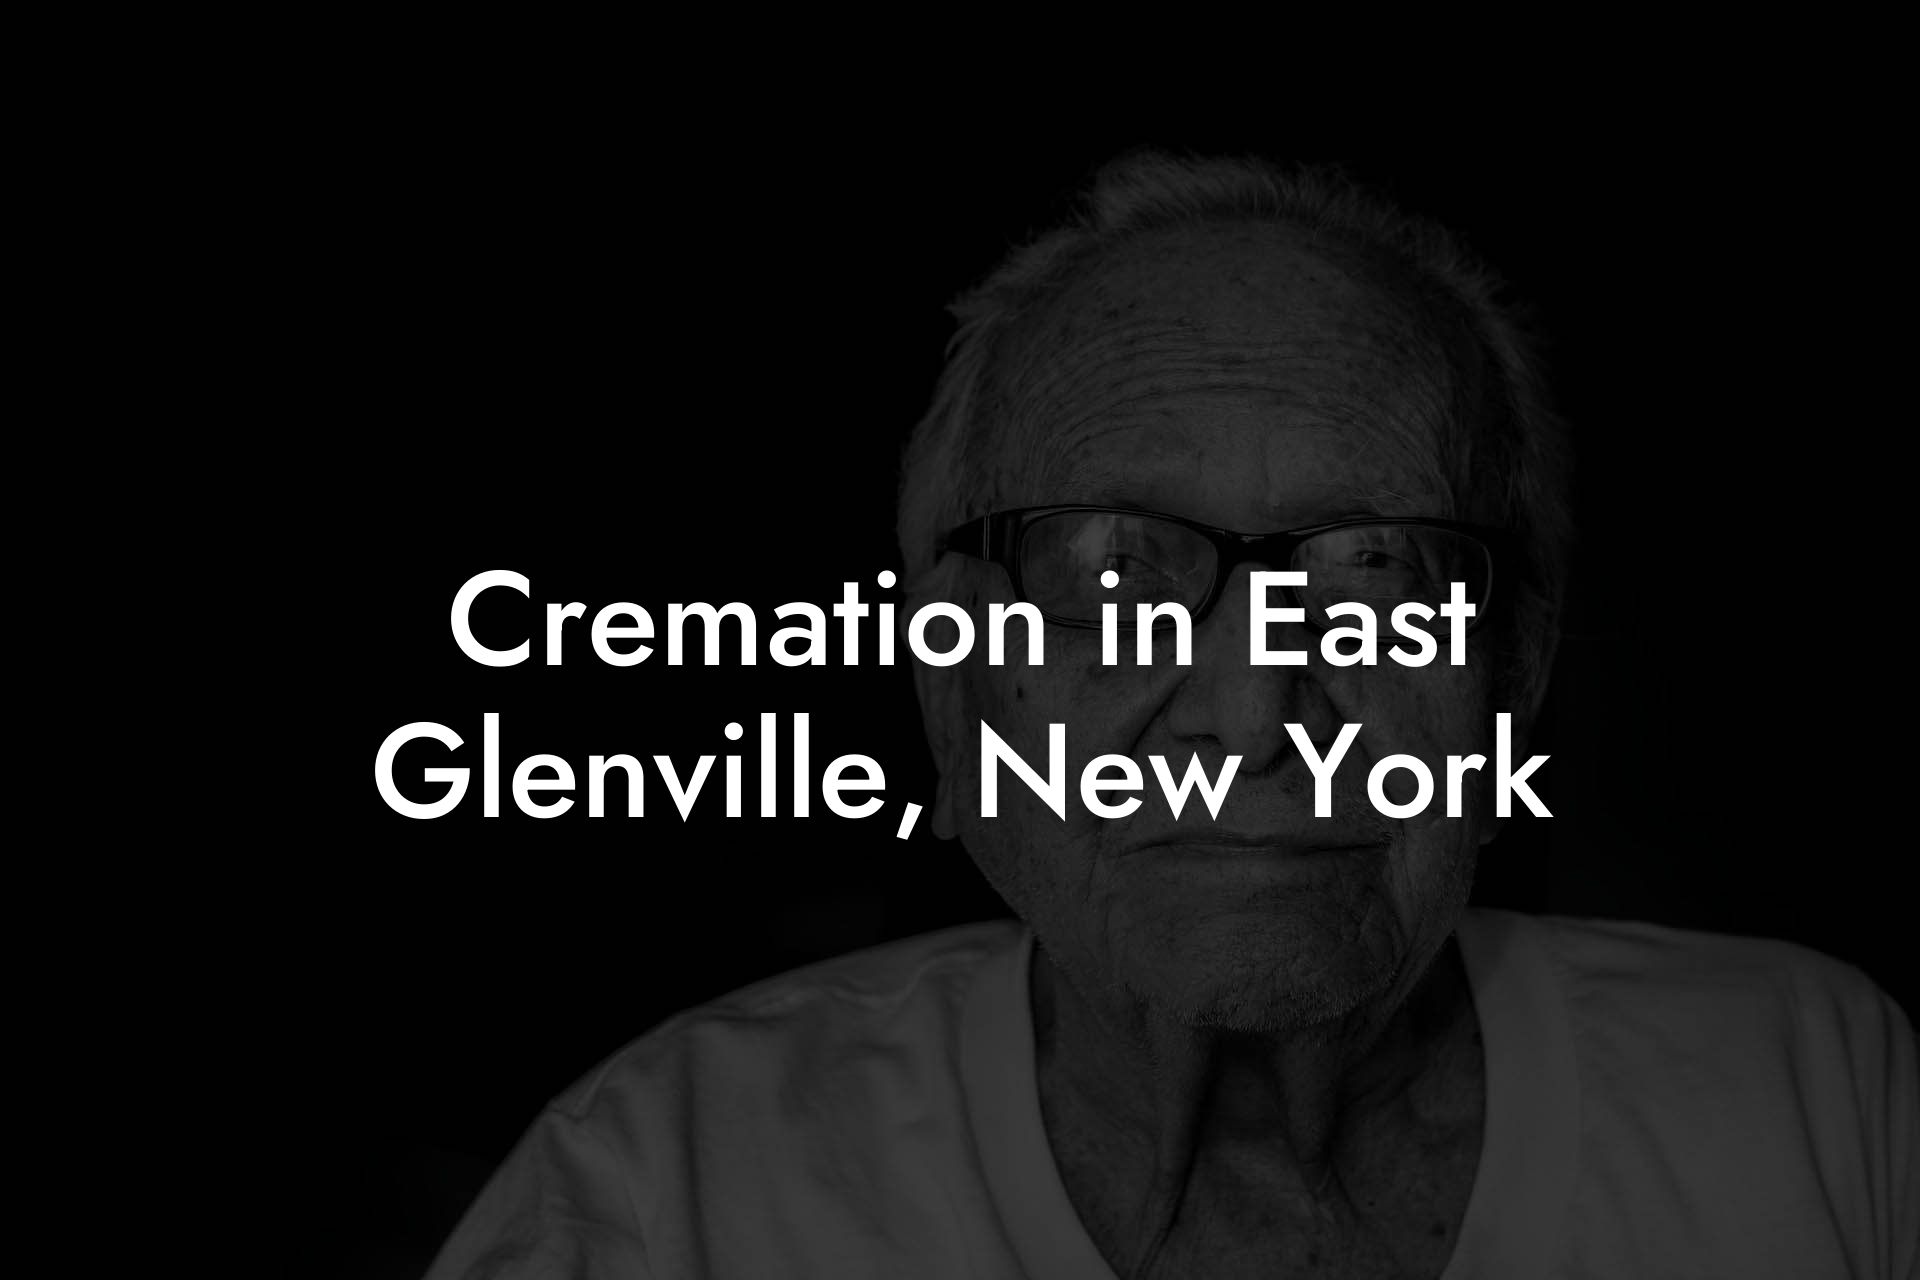 Cremation in East Glenville, New York